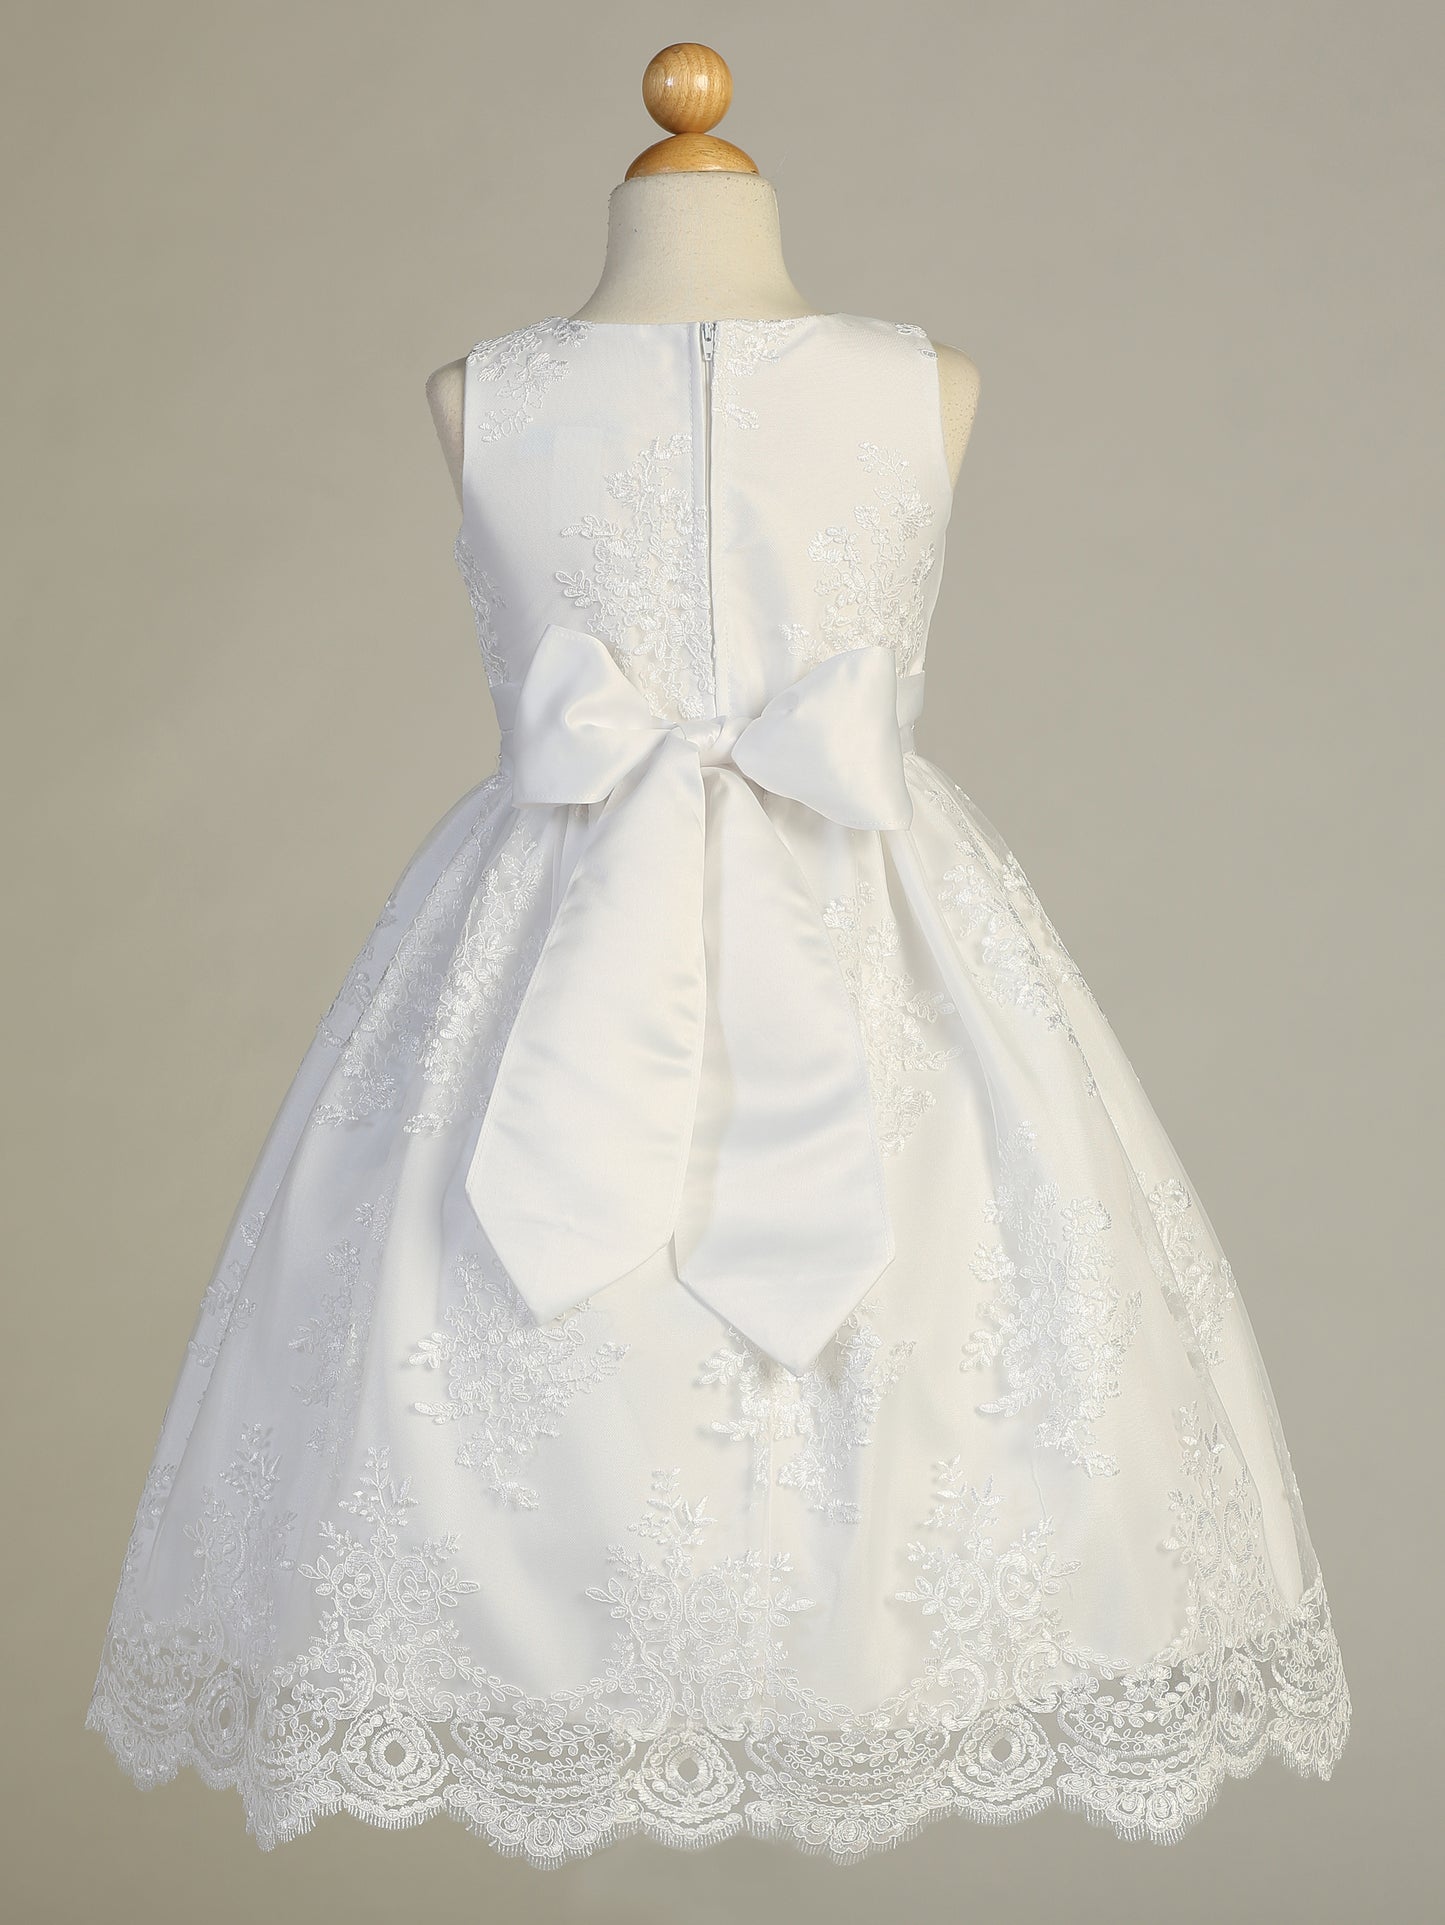 Corded Embroidery Lace First Communion Dress - SP164